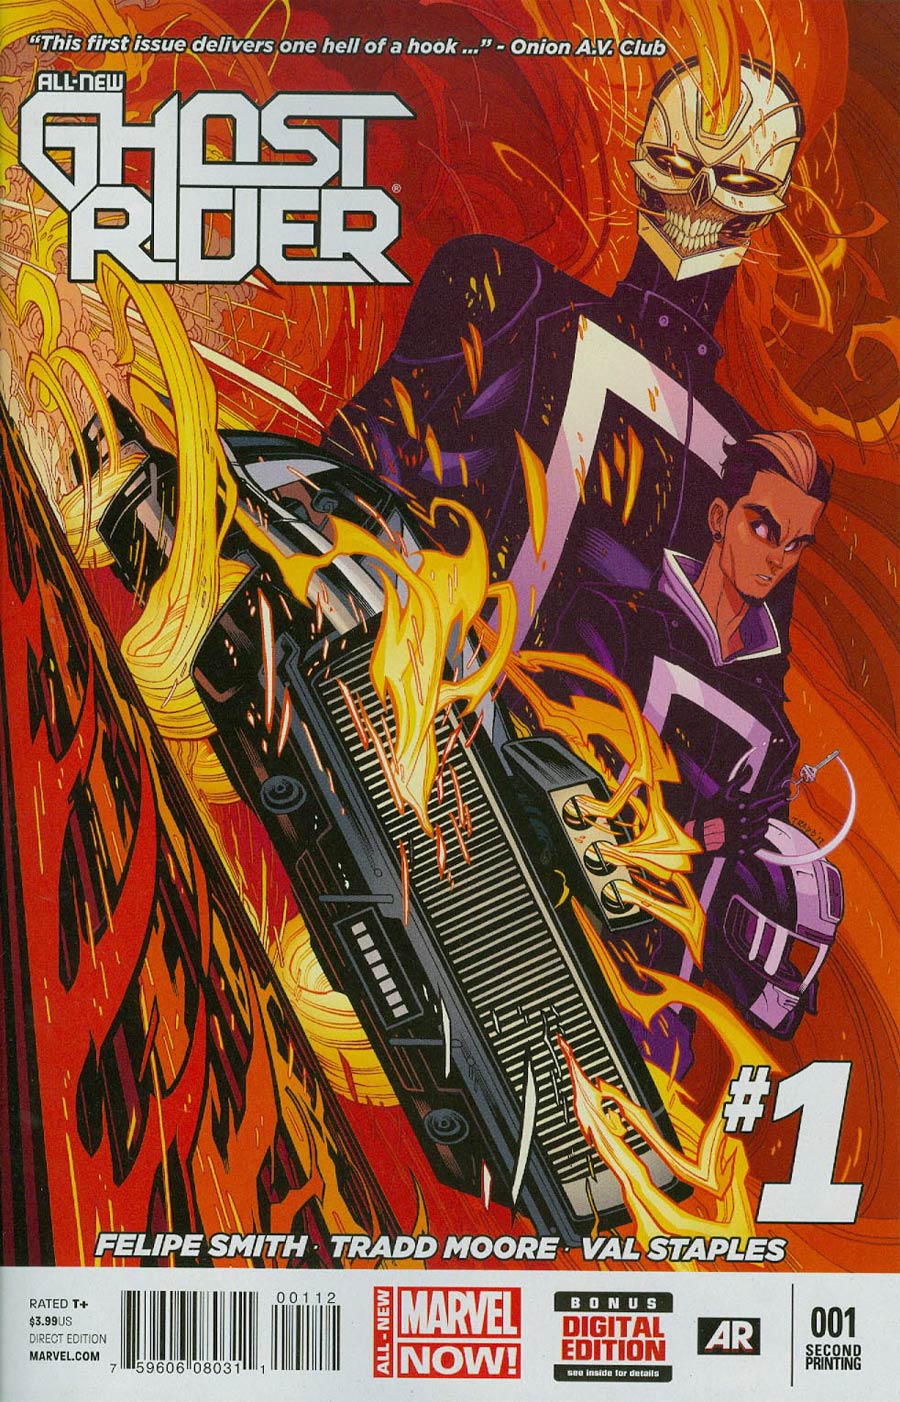 All-New Ghost Rider #1 Cover F 2nd Ptg Tradd Moore Variant Cover